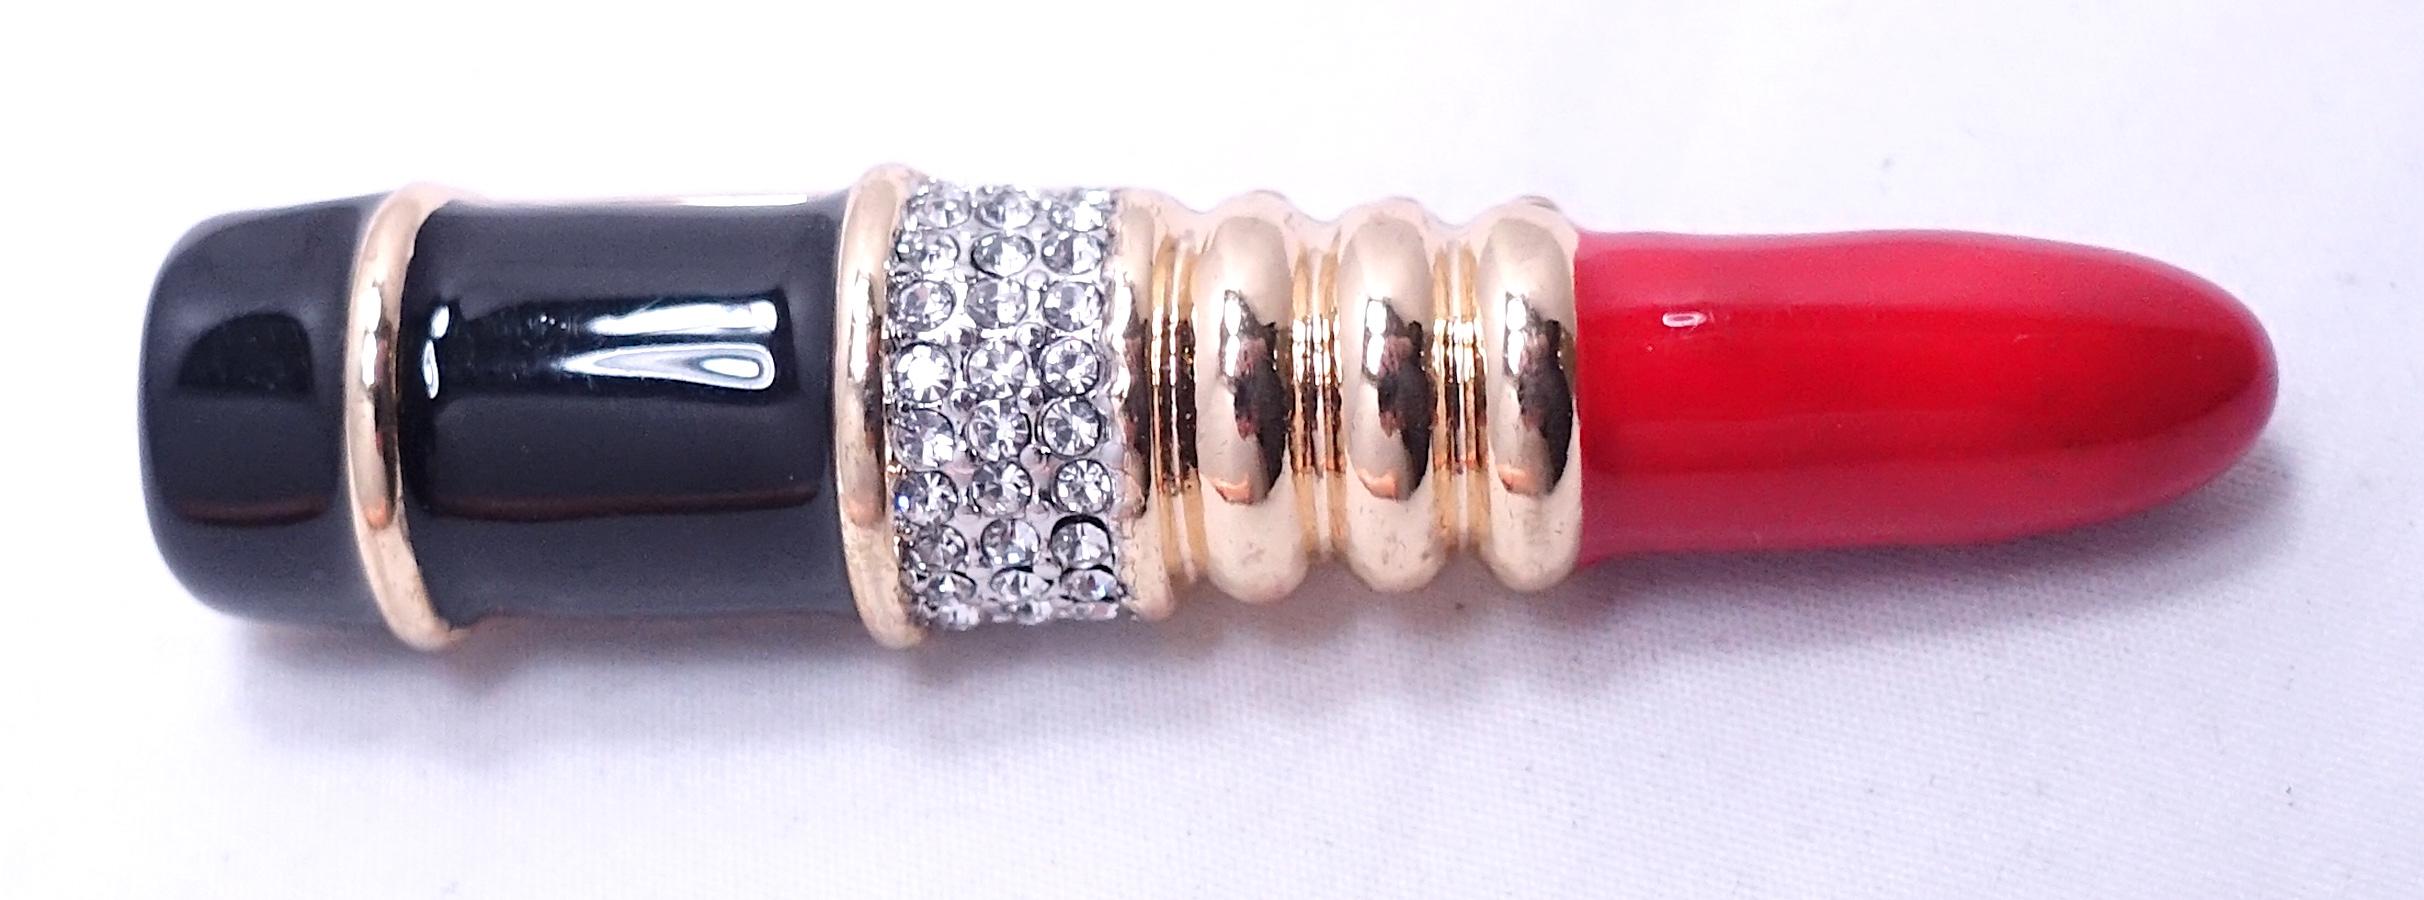 This famous vintage bookpiece lipstick brooch was made by Kenneth Jay Lane.  It features red and black resin with clear crystals in a gold tone setting.  In excellent condition, this brooch measures 2-1/2” x 1/2” and is signed “KJL”.